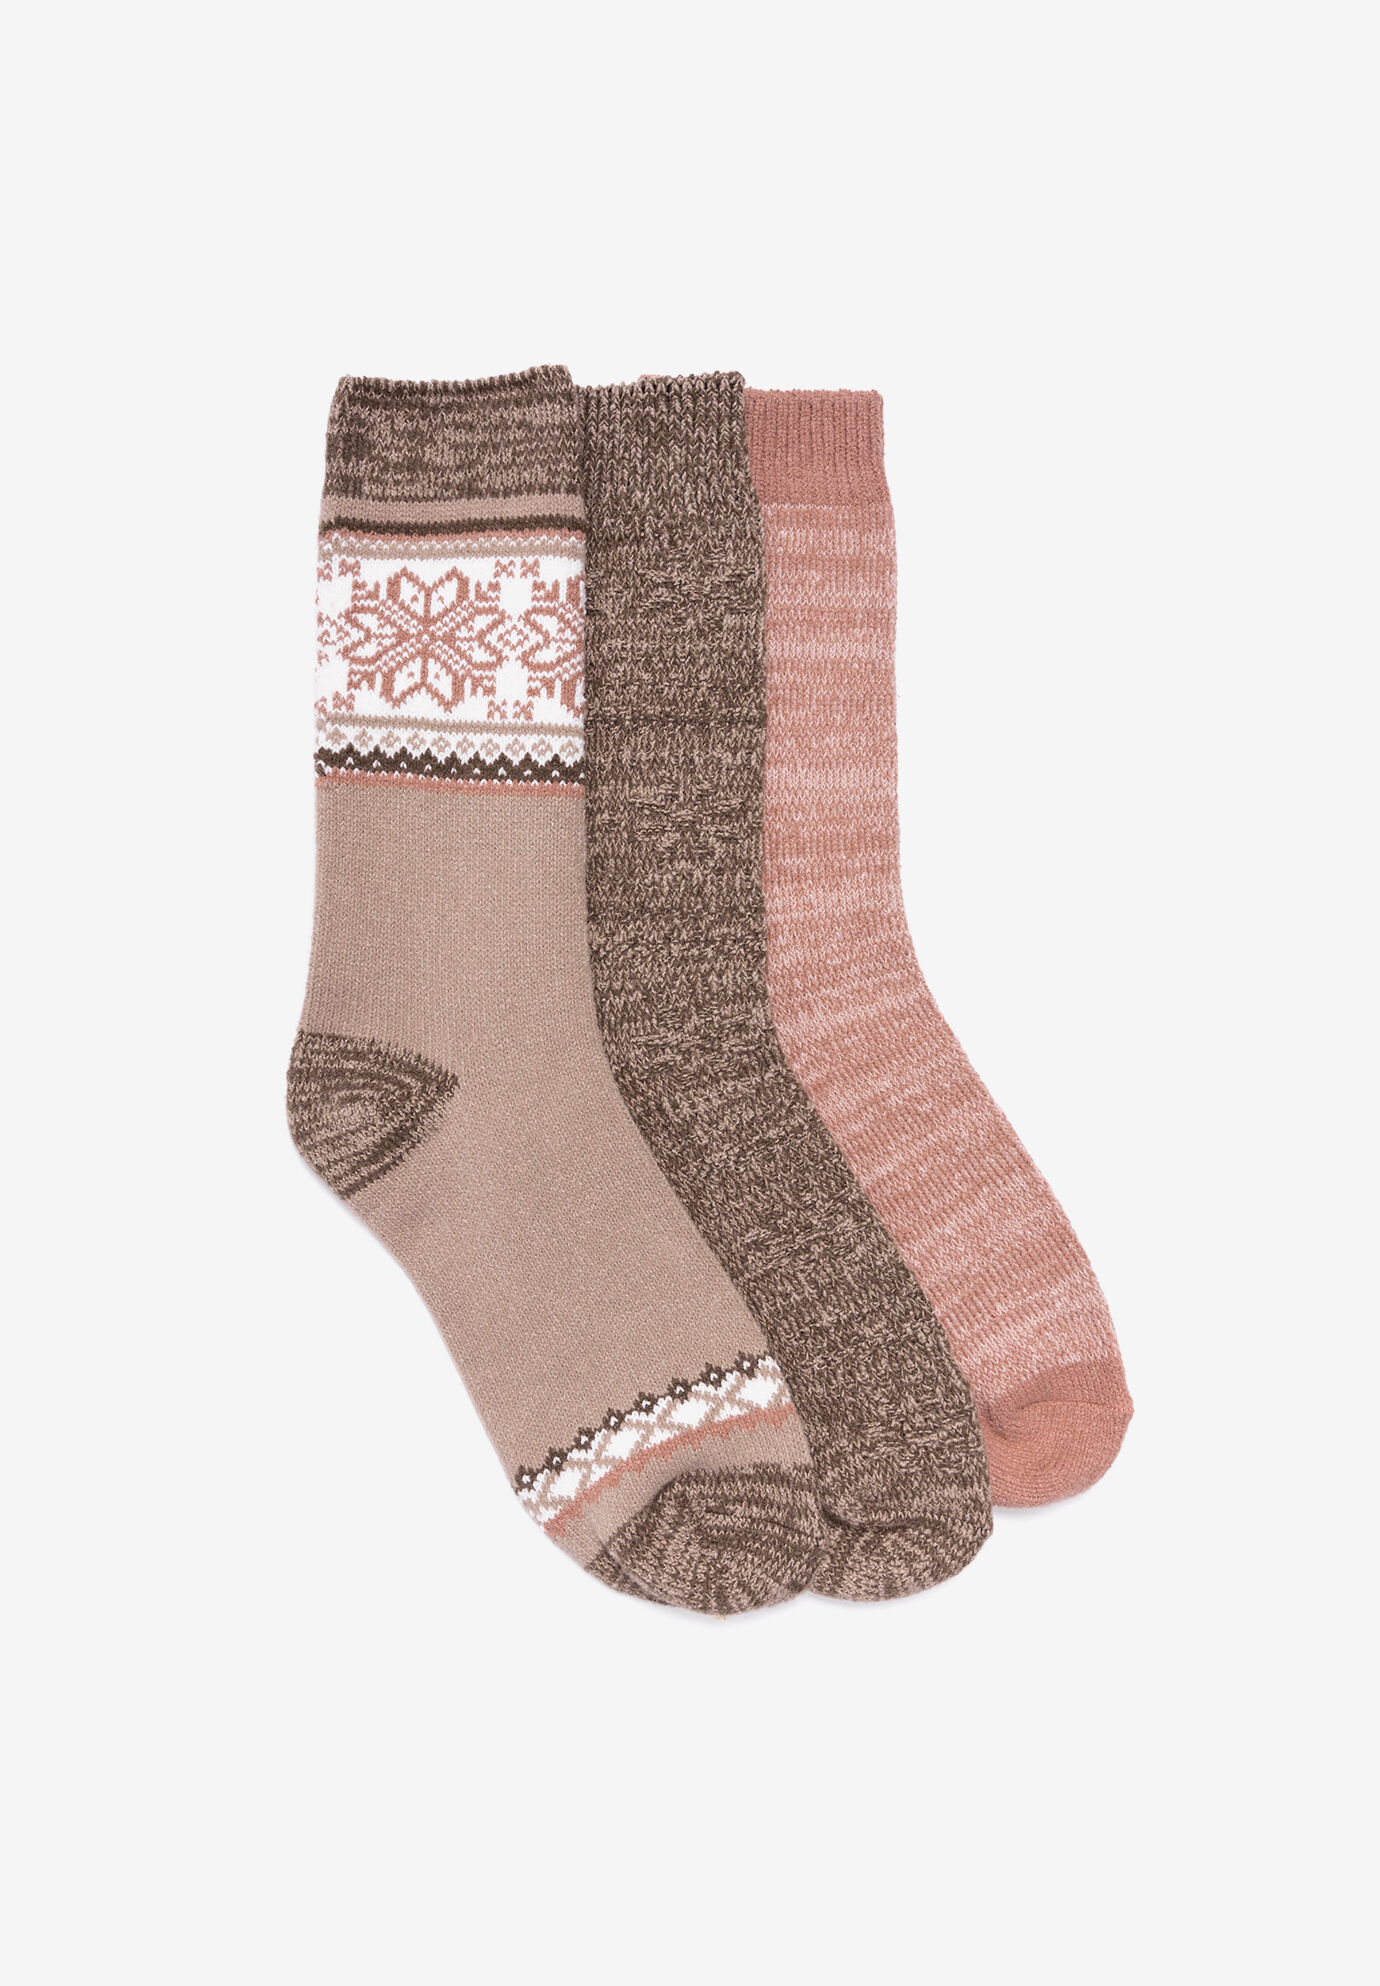 Women's 3 Pair Pack Boot Socks by MUK LUKS in Pink Neutral (Size ONE)